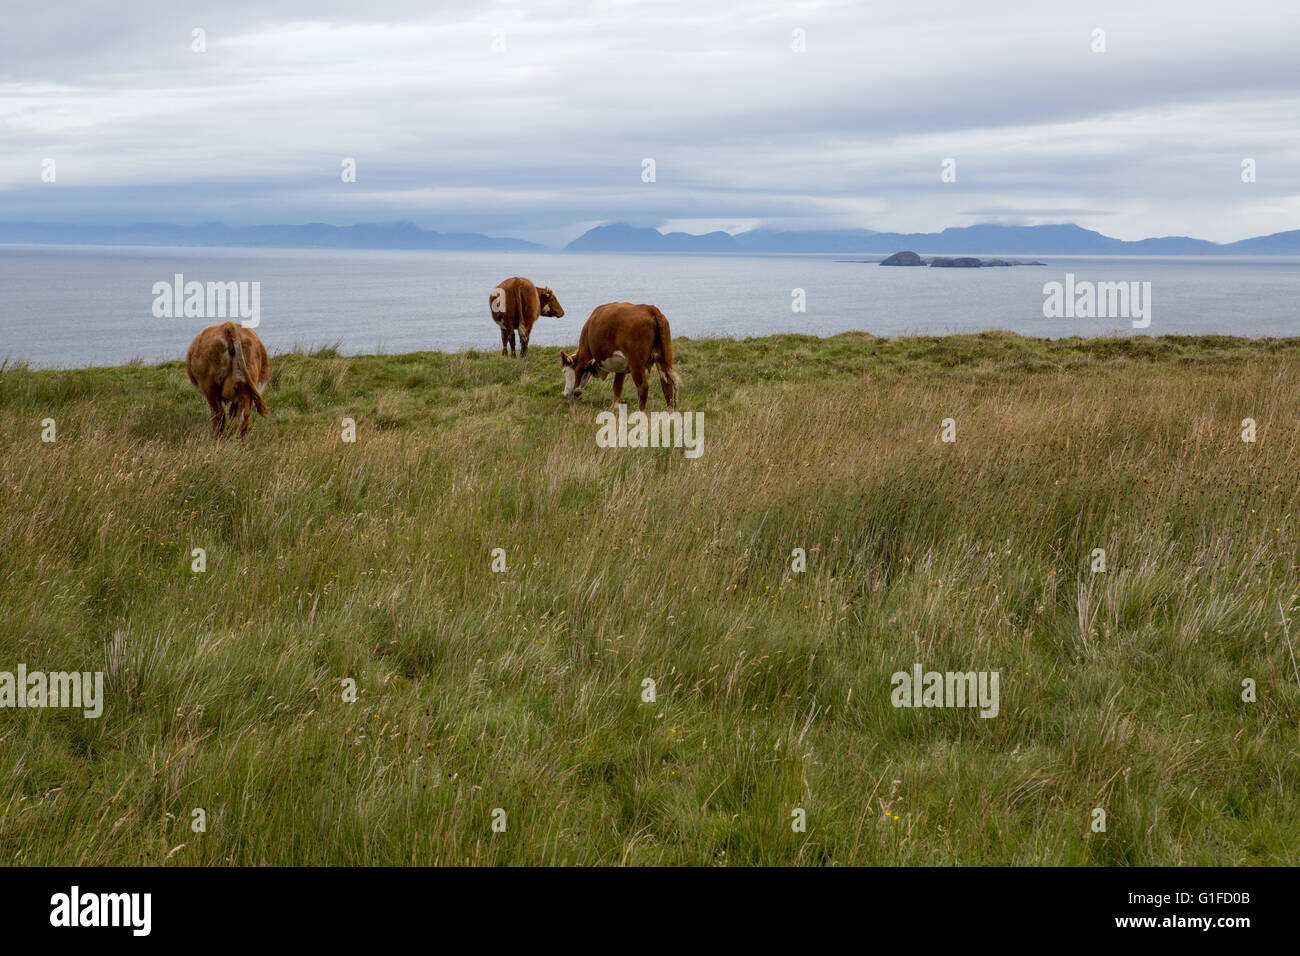 Free range cows on a field overlooking the ocean Stock Photo